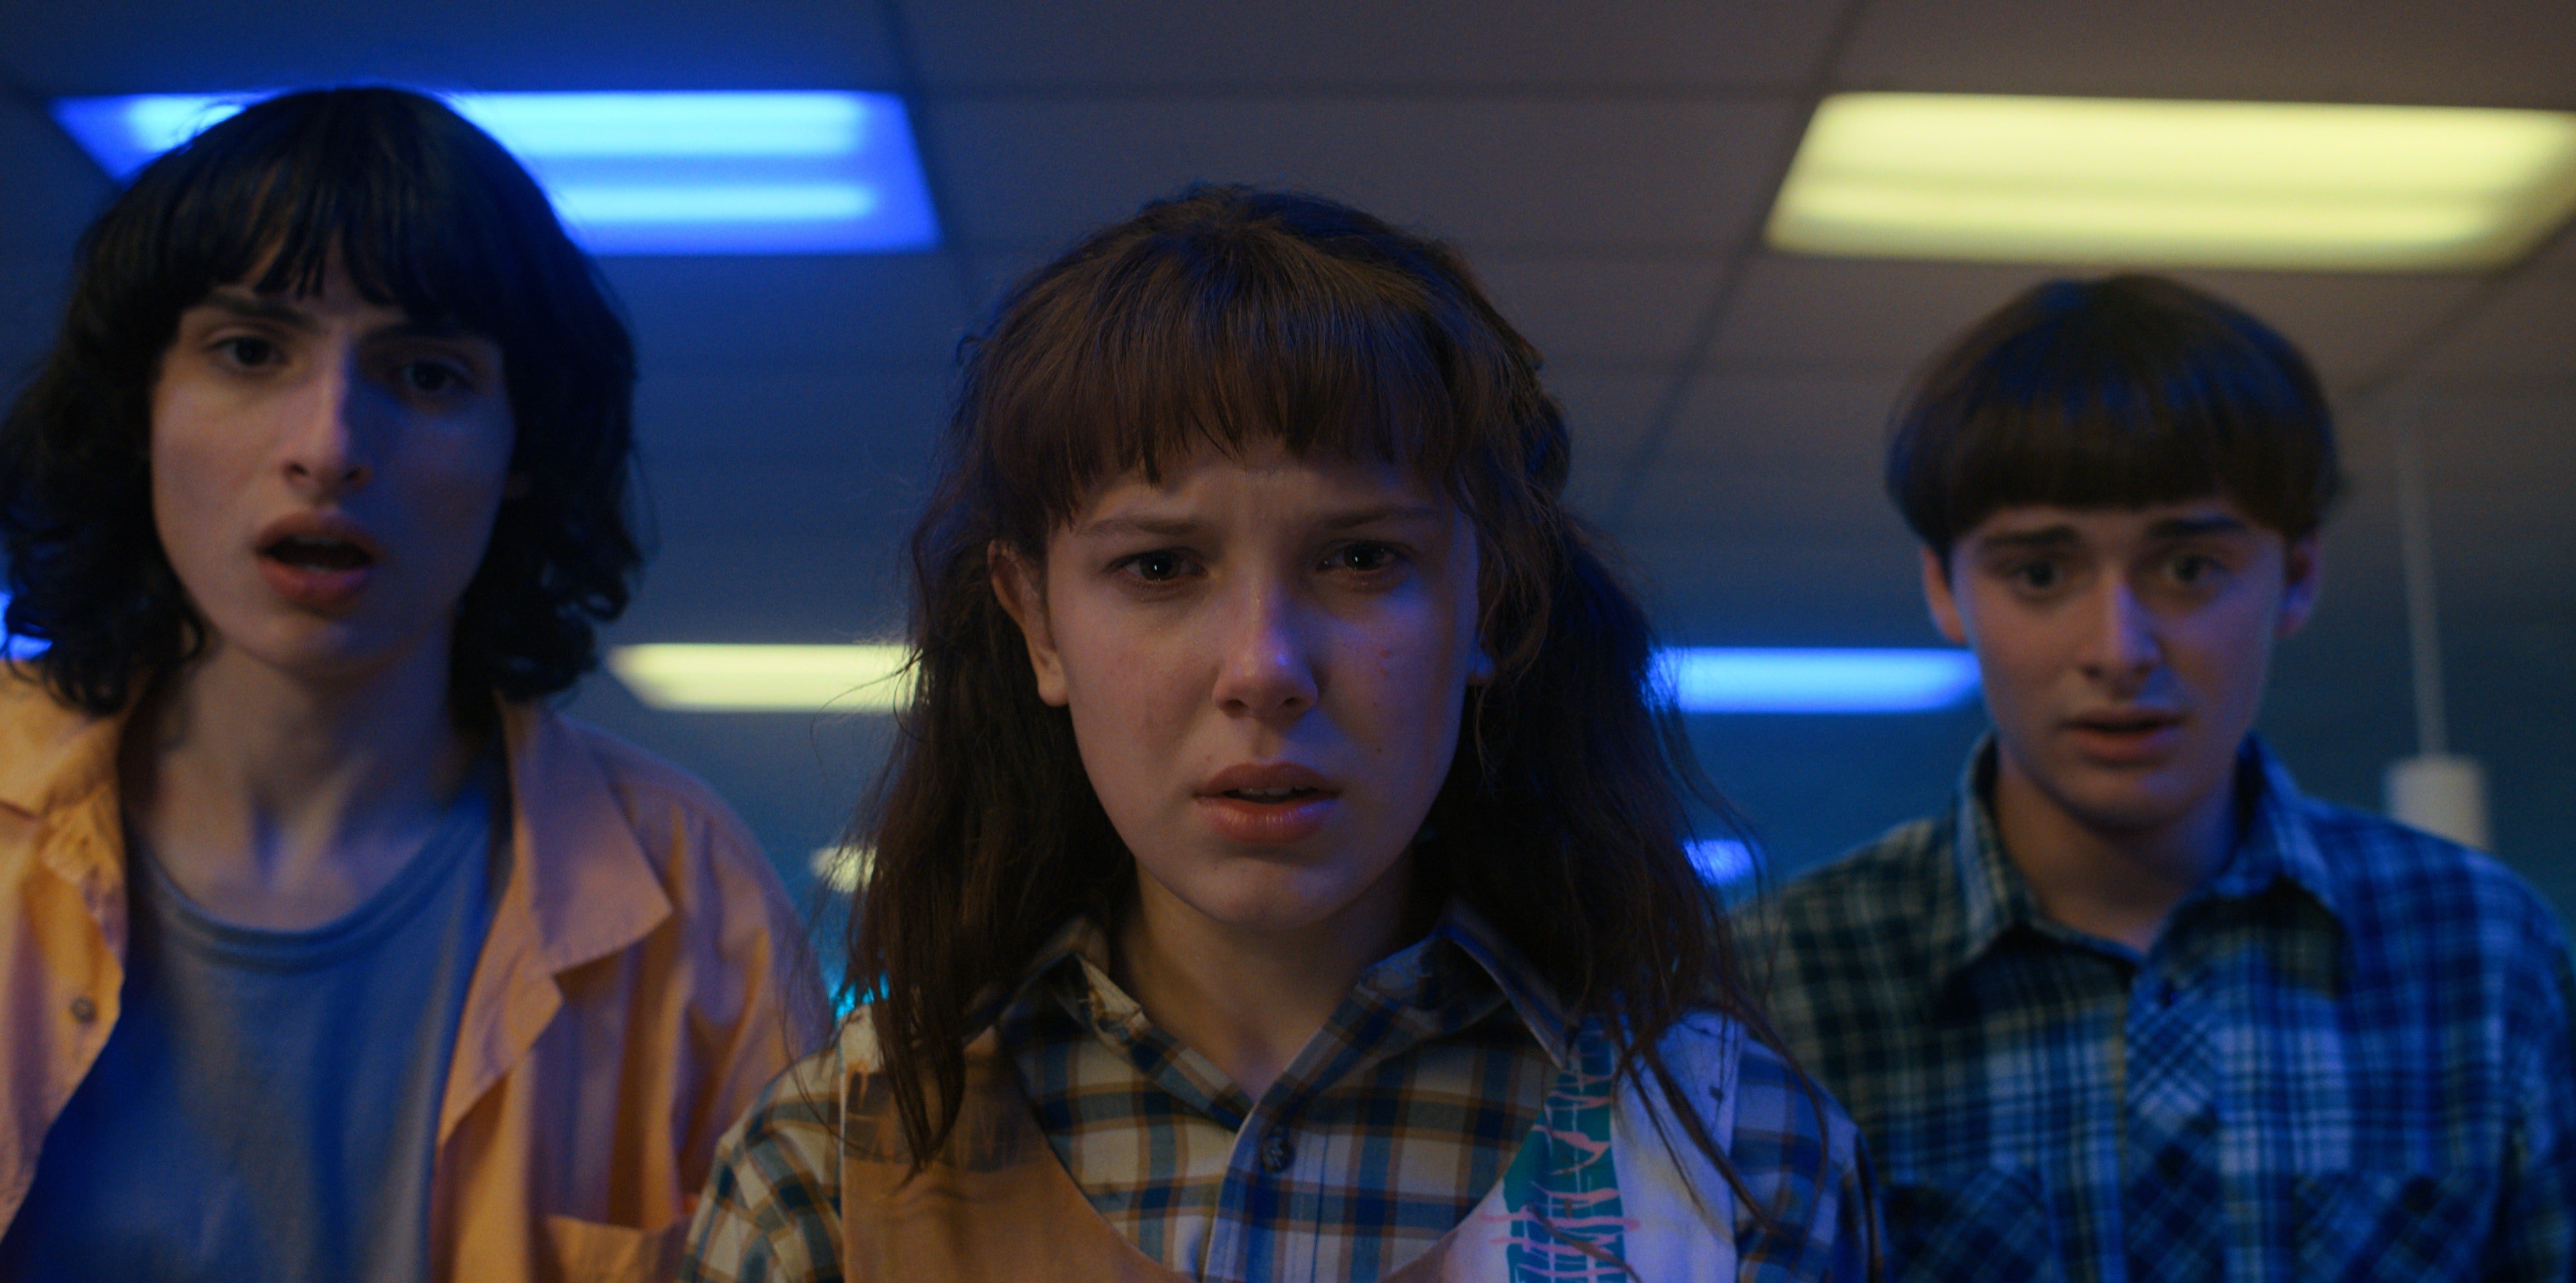 Every Question You Have About 'Stranger Things' Season 4: Volume Answered